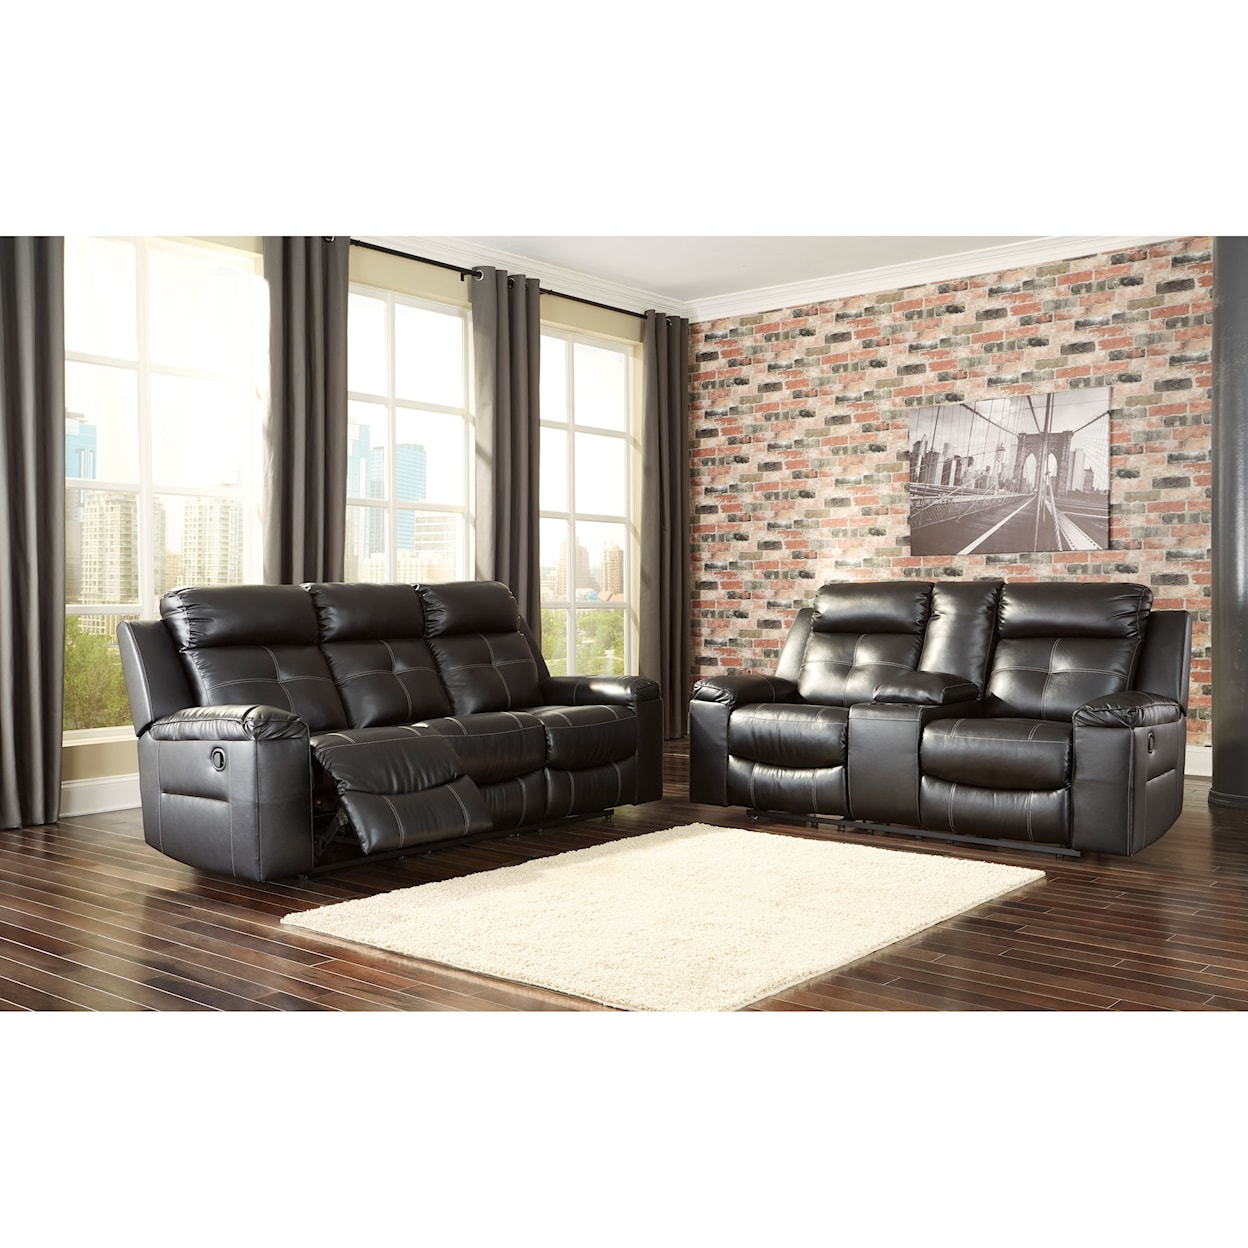 Signature Design by Ashley Kempten Reclining Living Room Group